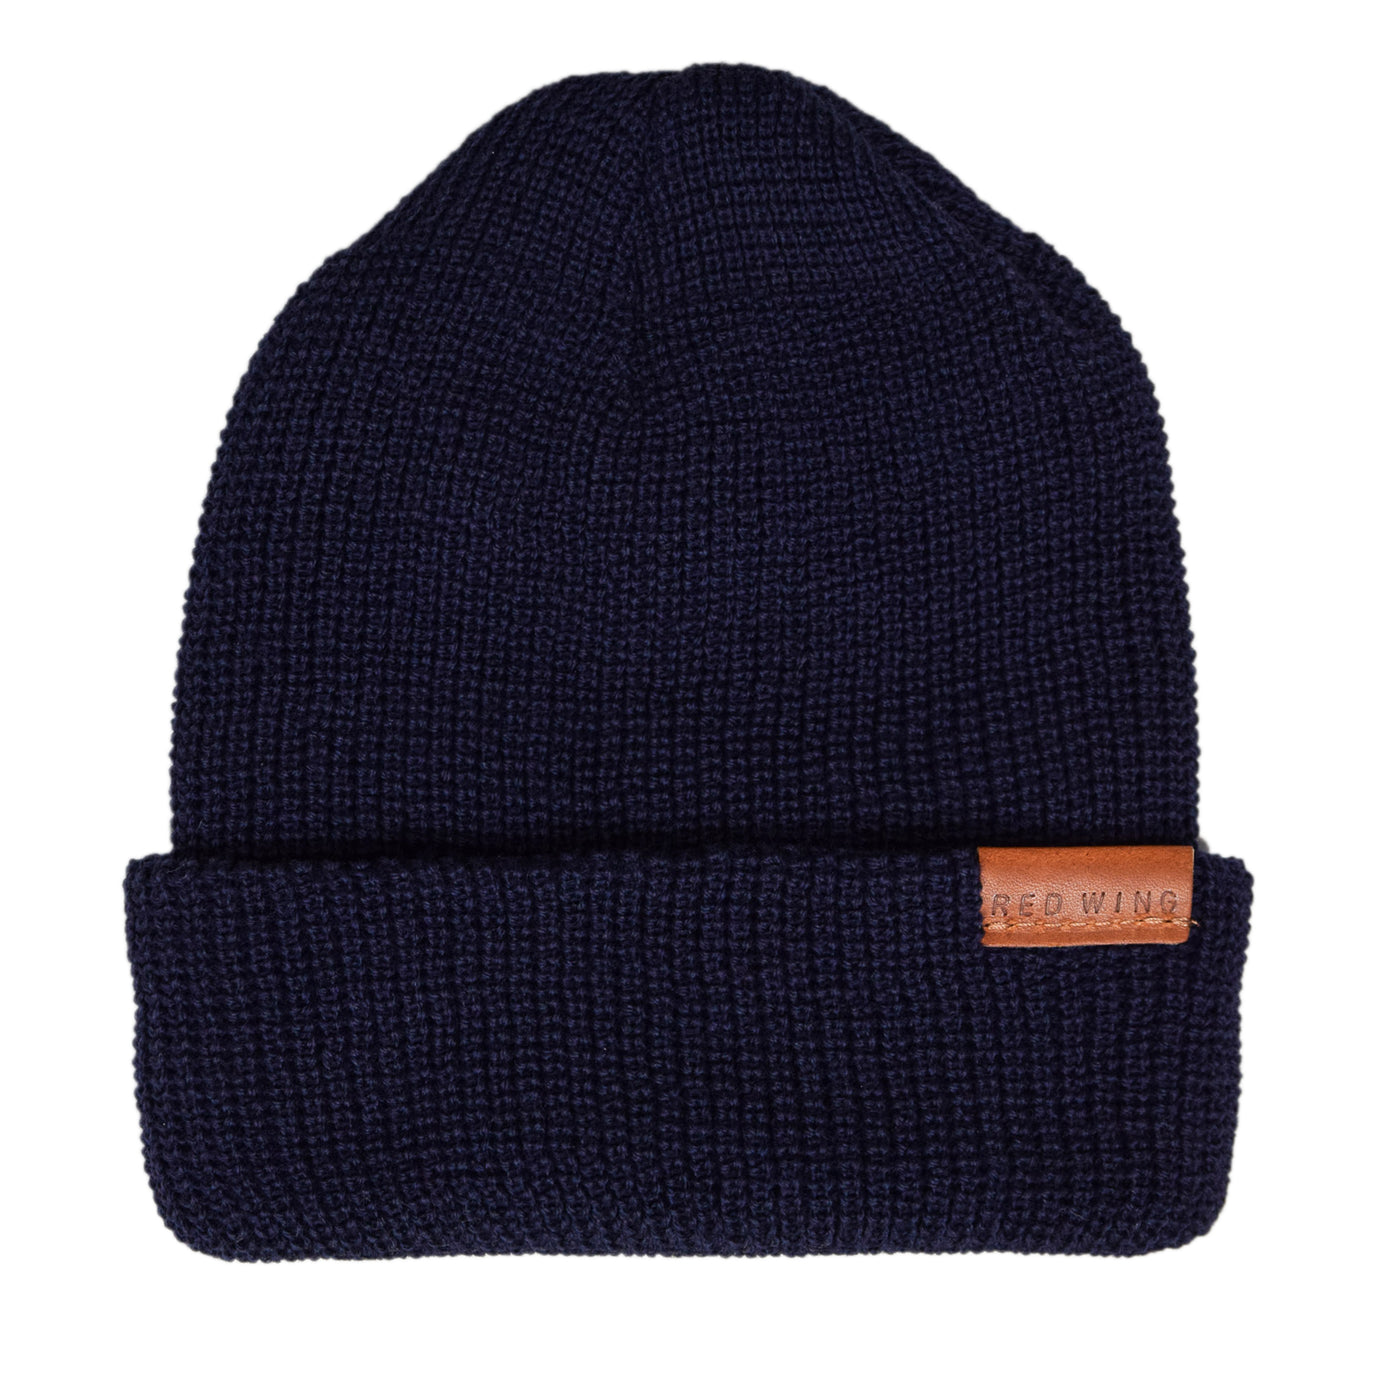 Red Wing Merino Wool Knit Beanie Navy front